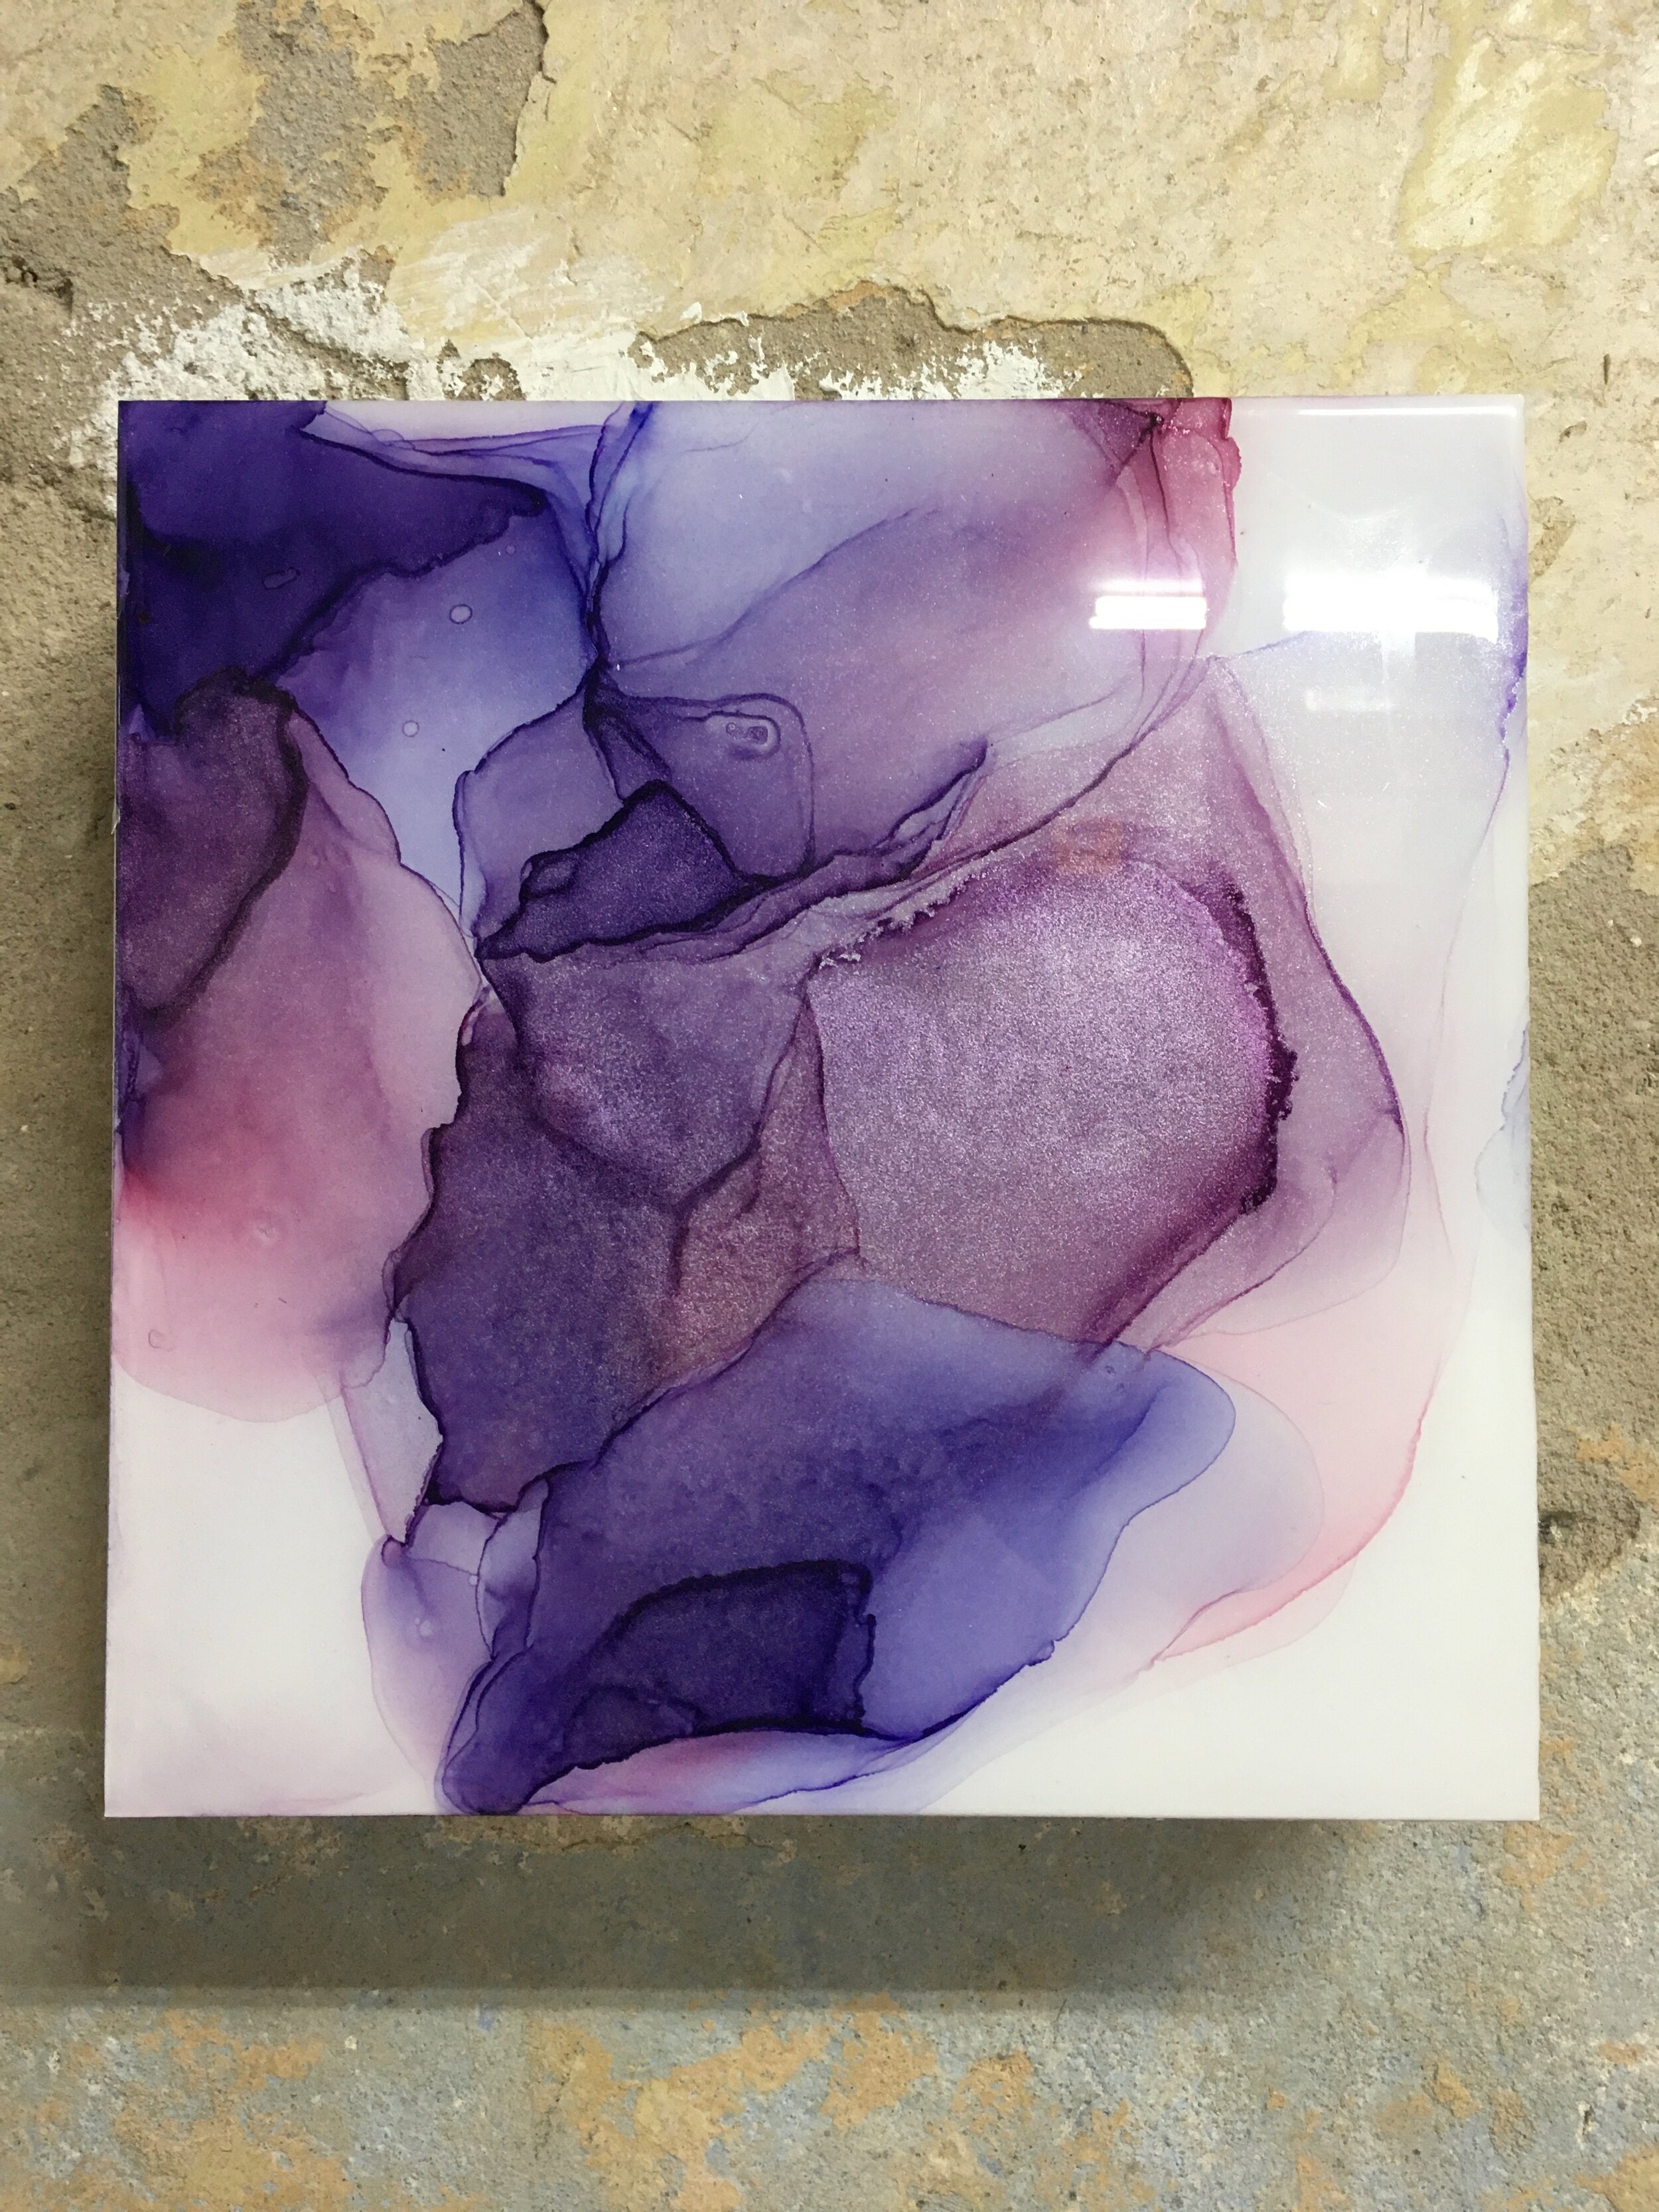 Alcohol Ink Art - How to use Alcohol Inks for your Art